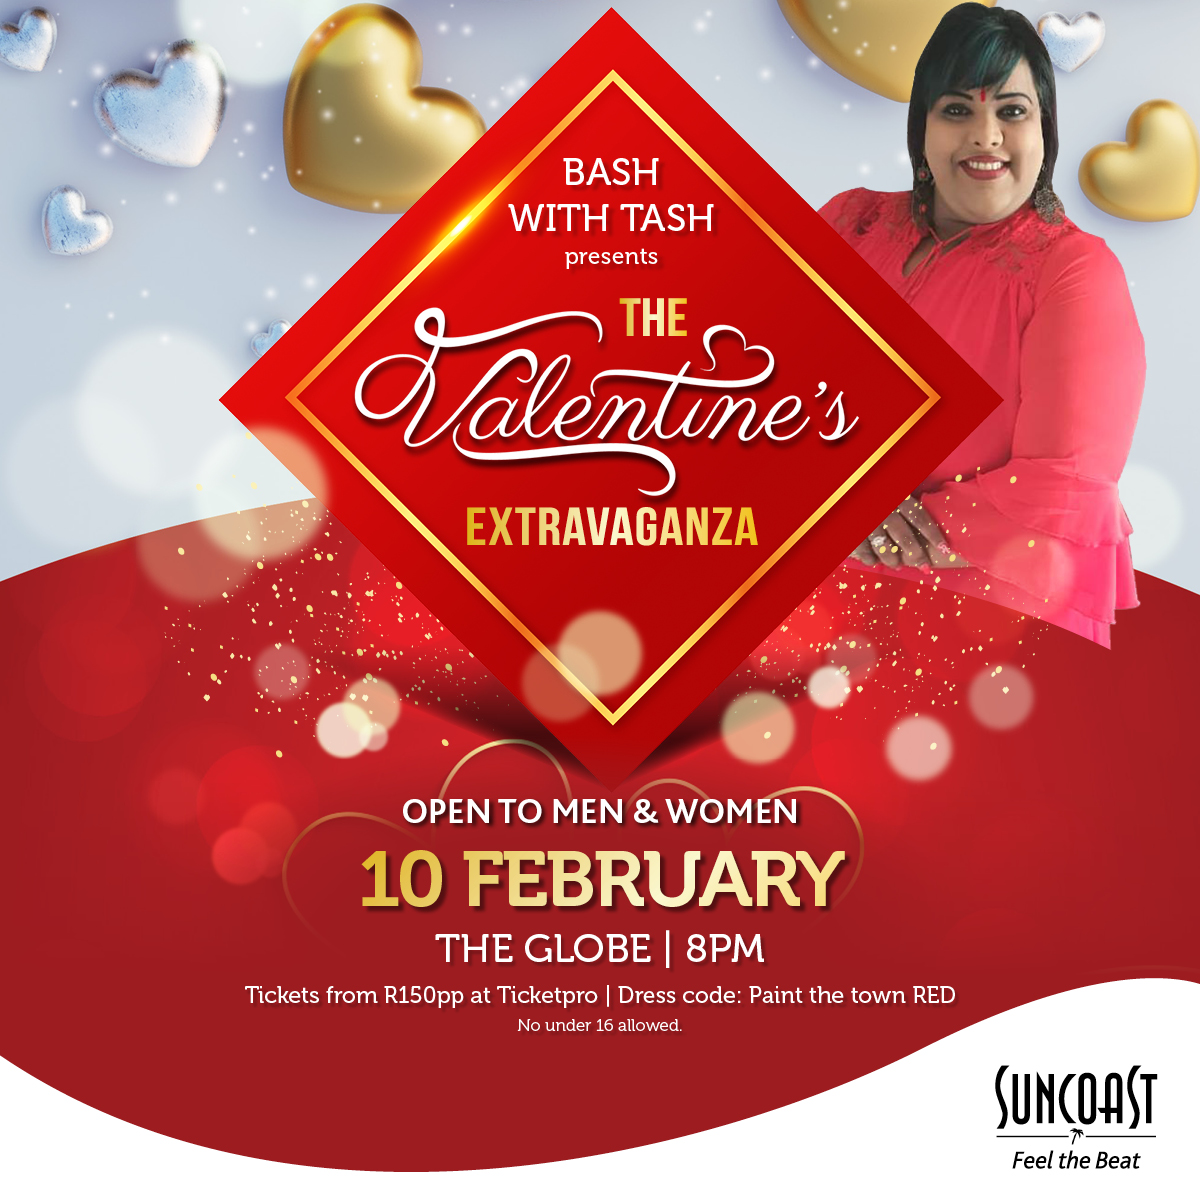 Love and laughter take centre stage! Join us for a Valentine's Comedy Night with the hilarious Bash with Tash at Suncoast this Feb. It's a date night filled with giggles and good times!🎤❤️Tickets available here bitly.ws/35nK5 #suncoastdurban #loveandlaughs